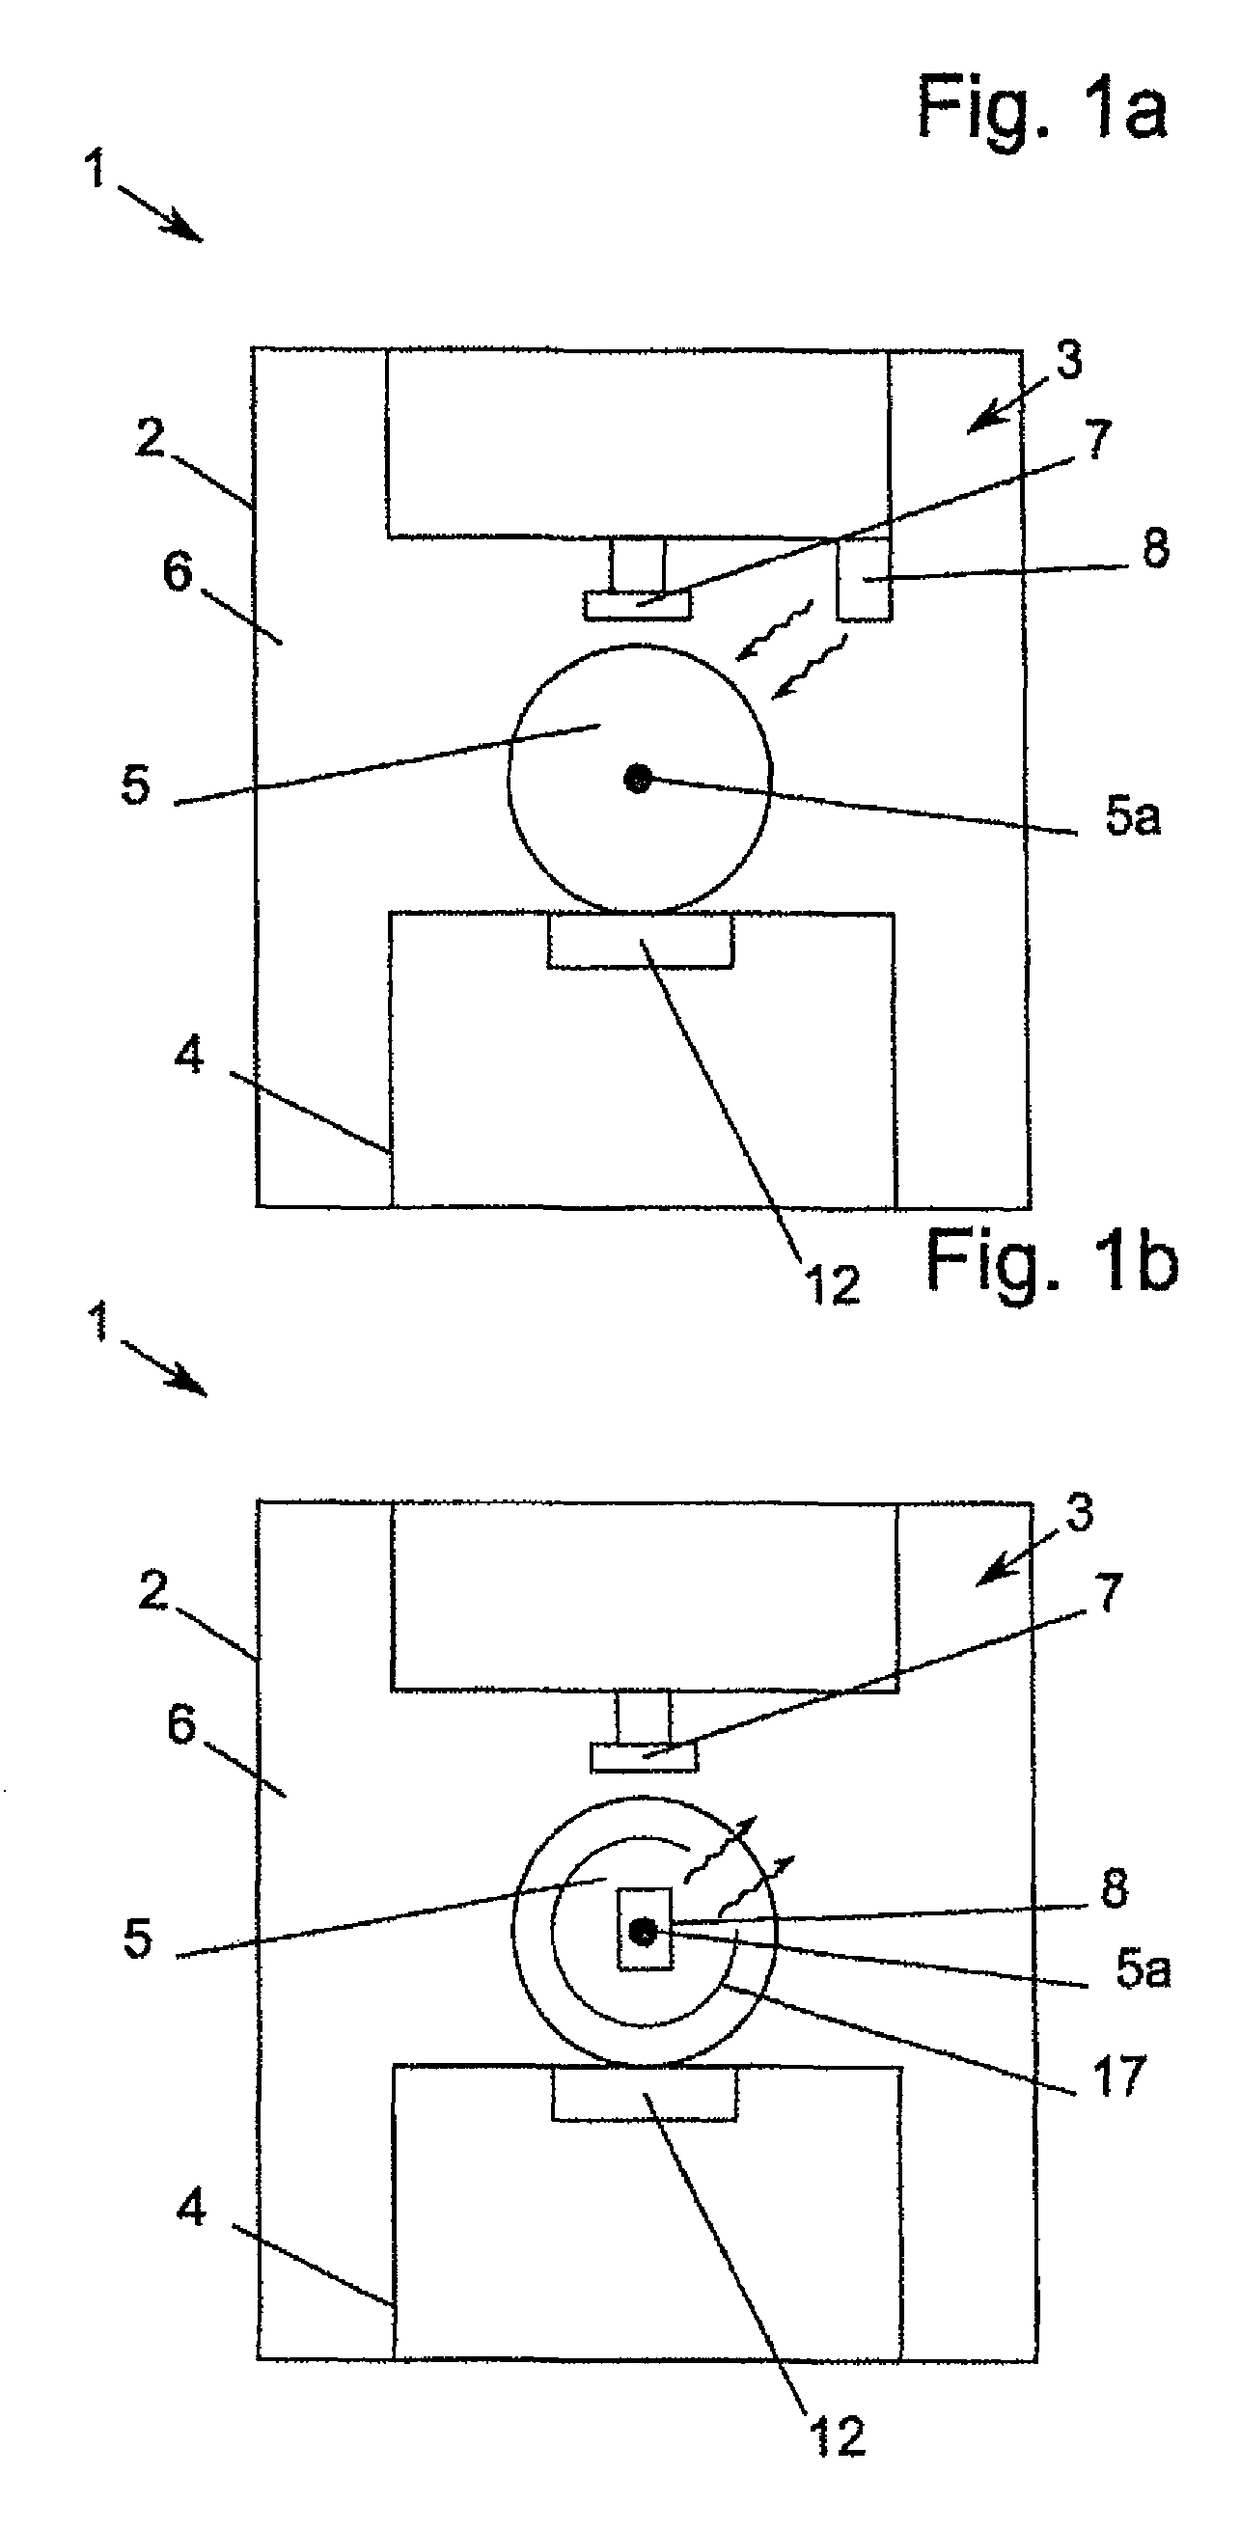 Nanostructure die, embossing roll, device and method for continuous embossing of nanostructures